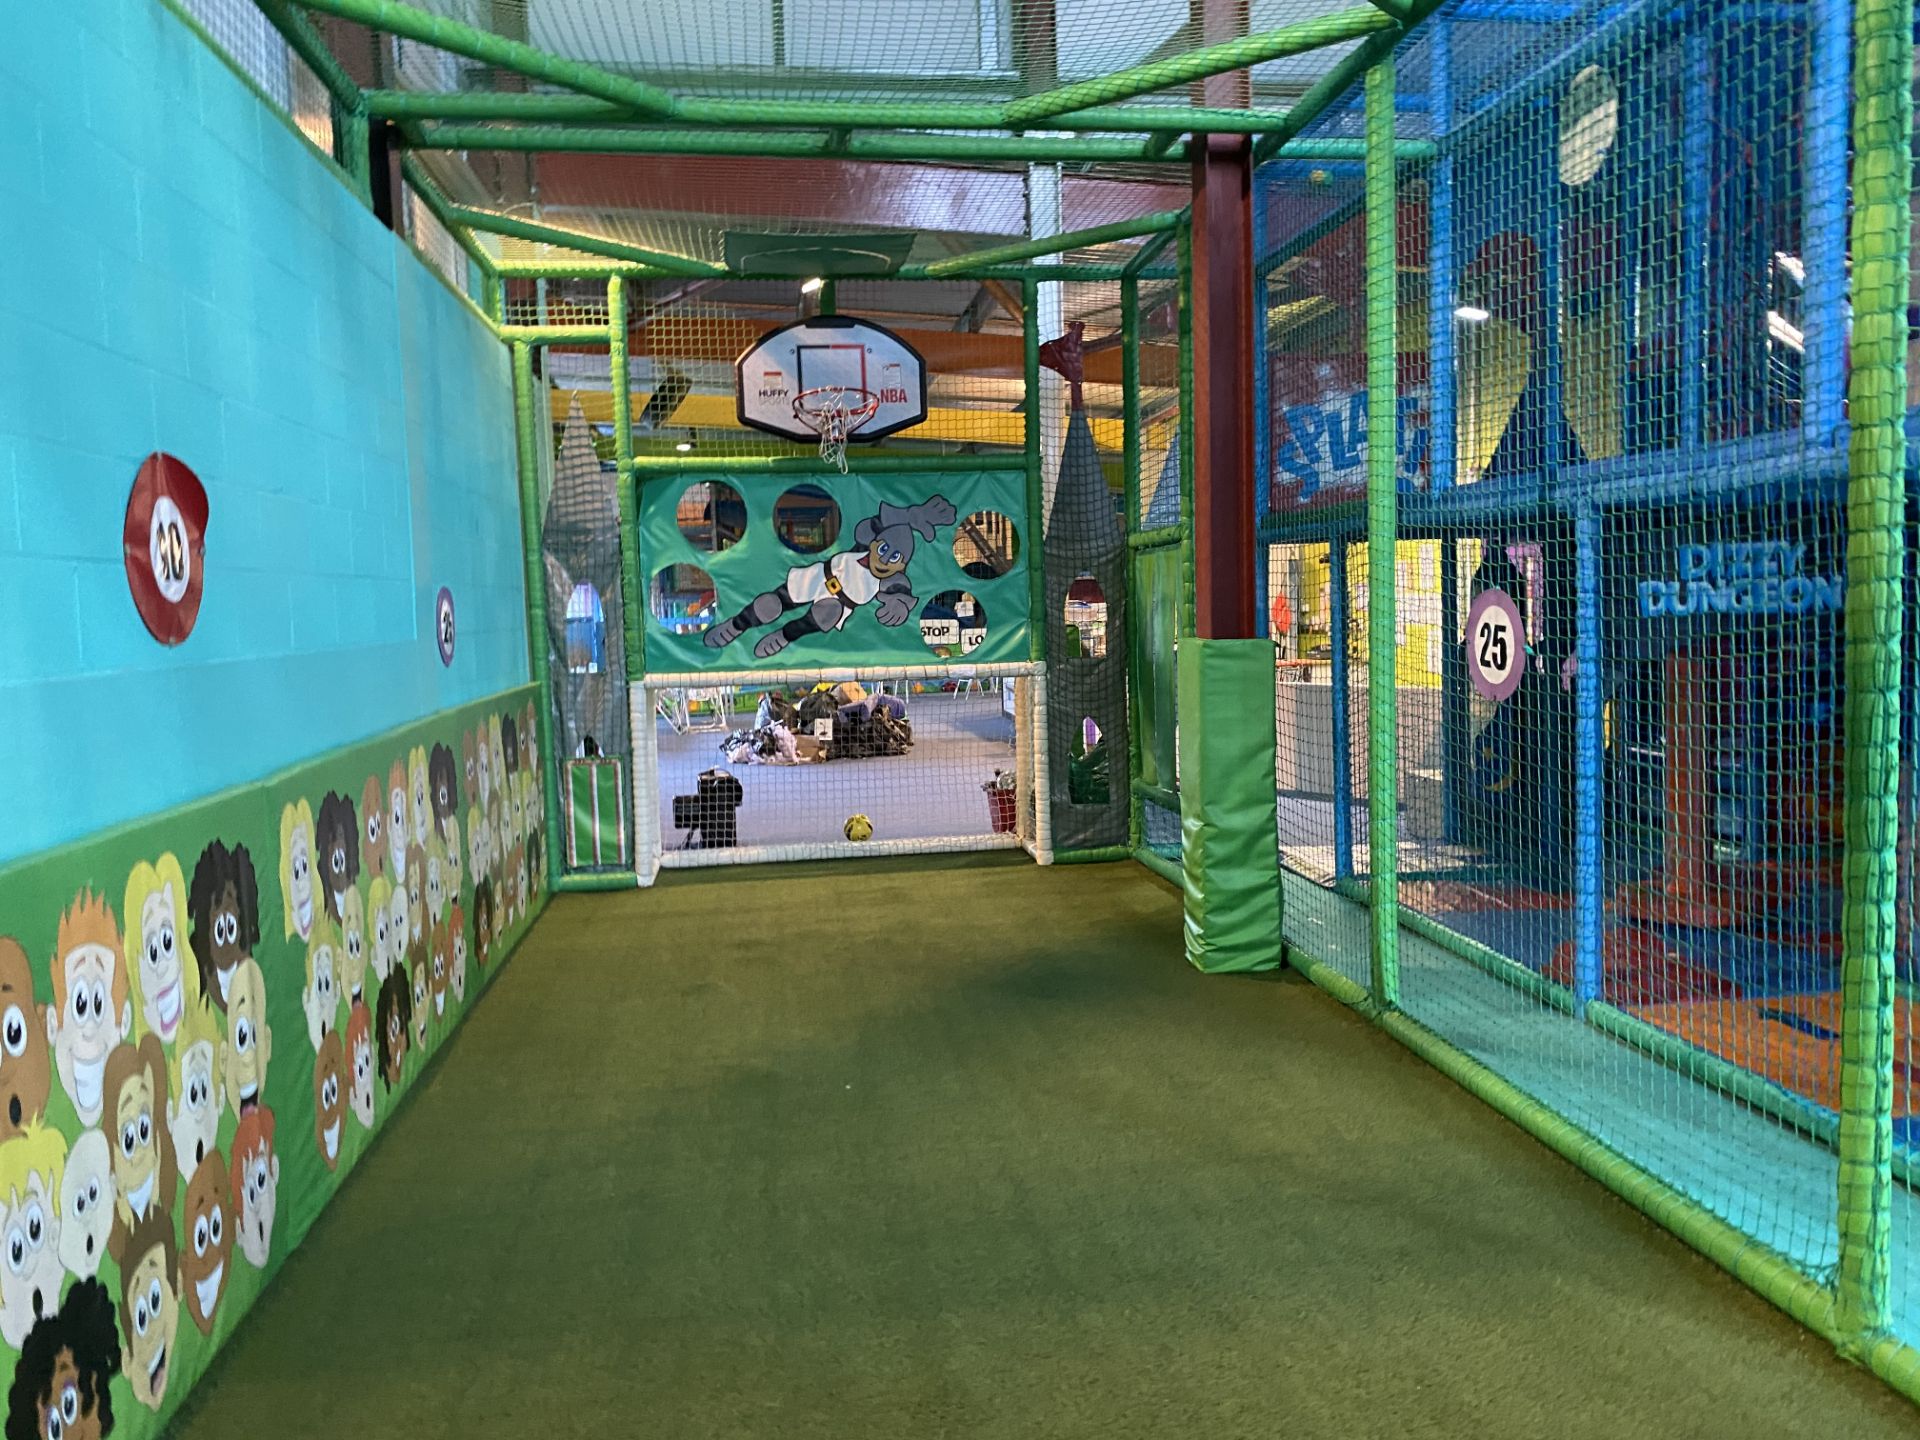 SINGLE TIER CHILDREN’S SOFT PLAY FOOTBALL PITCH STRUCTURE, approx. 9.6m long x 3m wide x 3.8m - Image 4 of 5